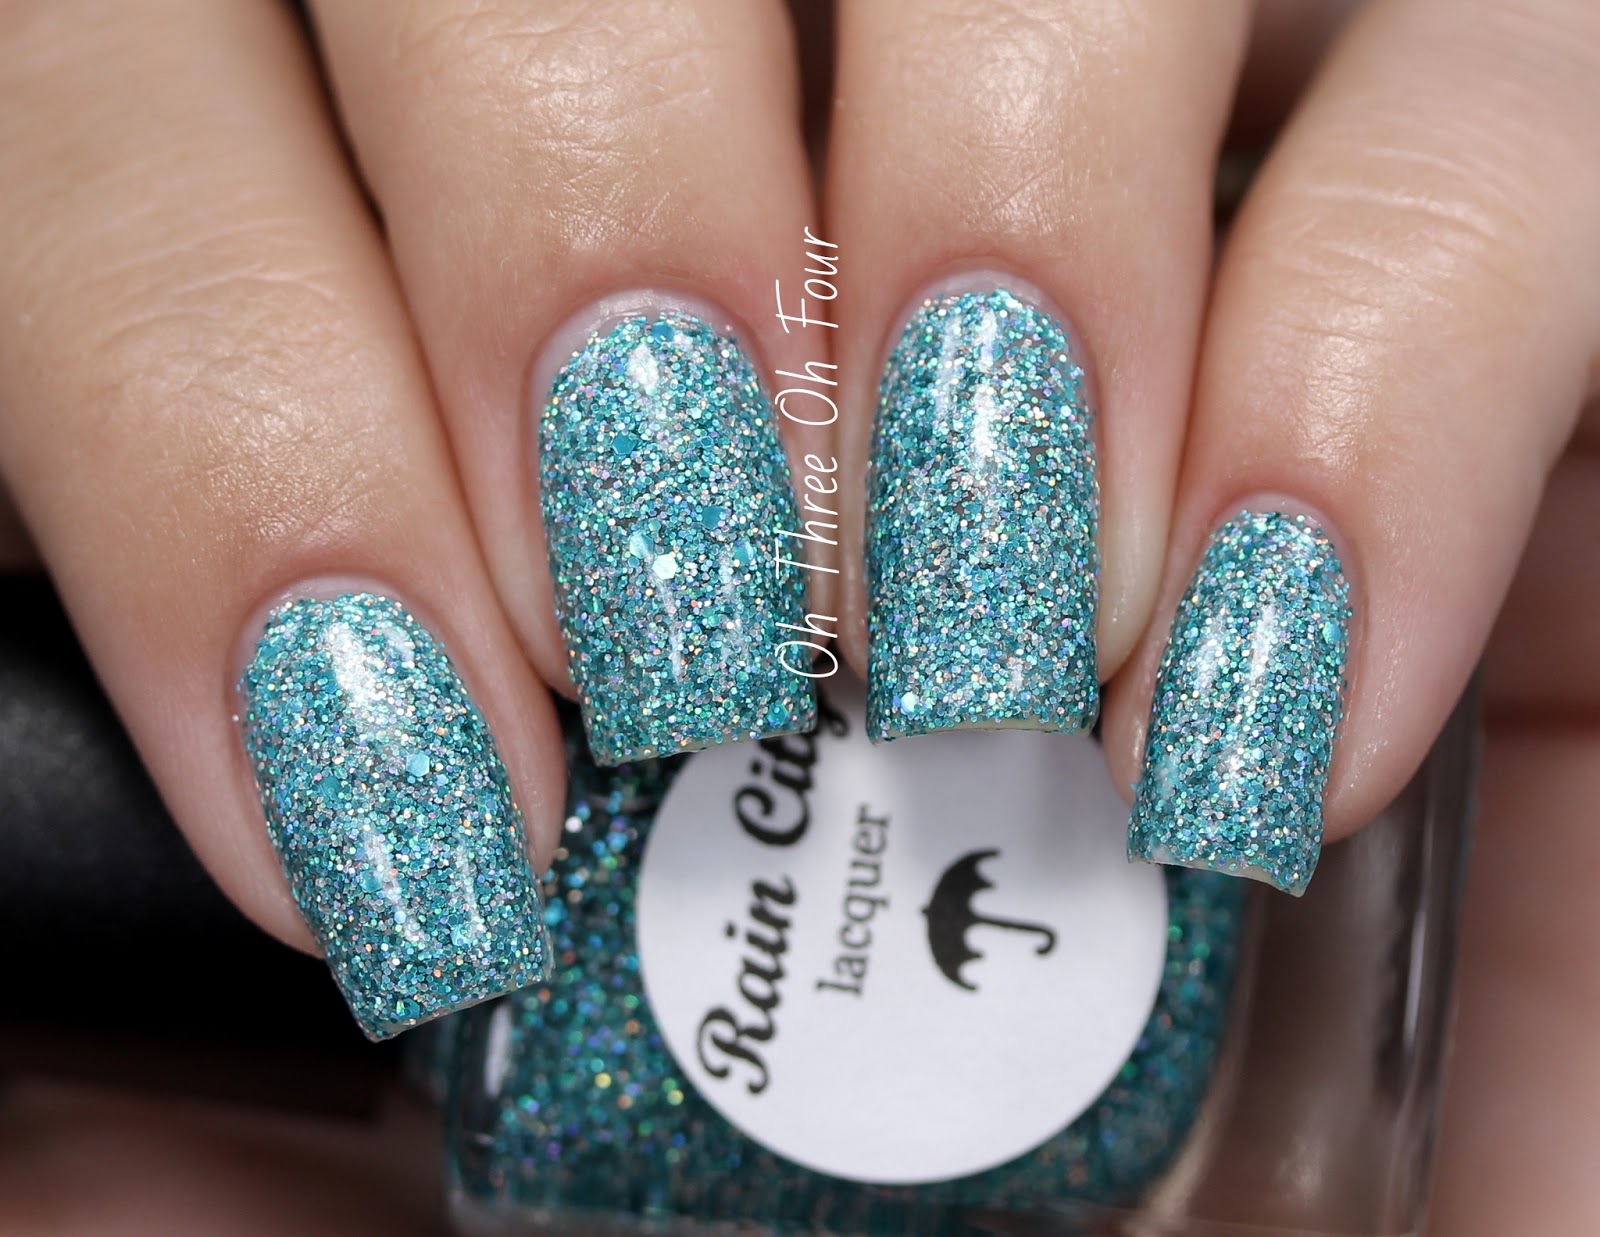 Rain City Lacquer Enchanted Waters Swatch